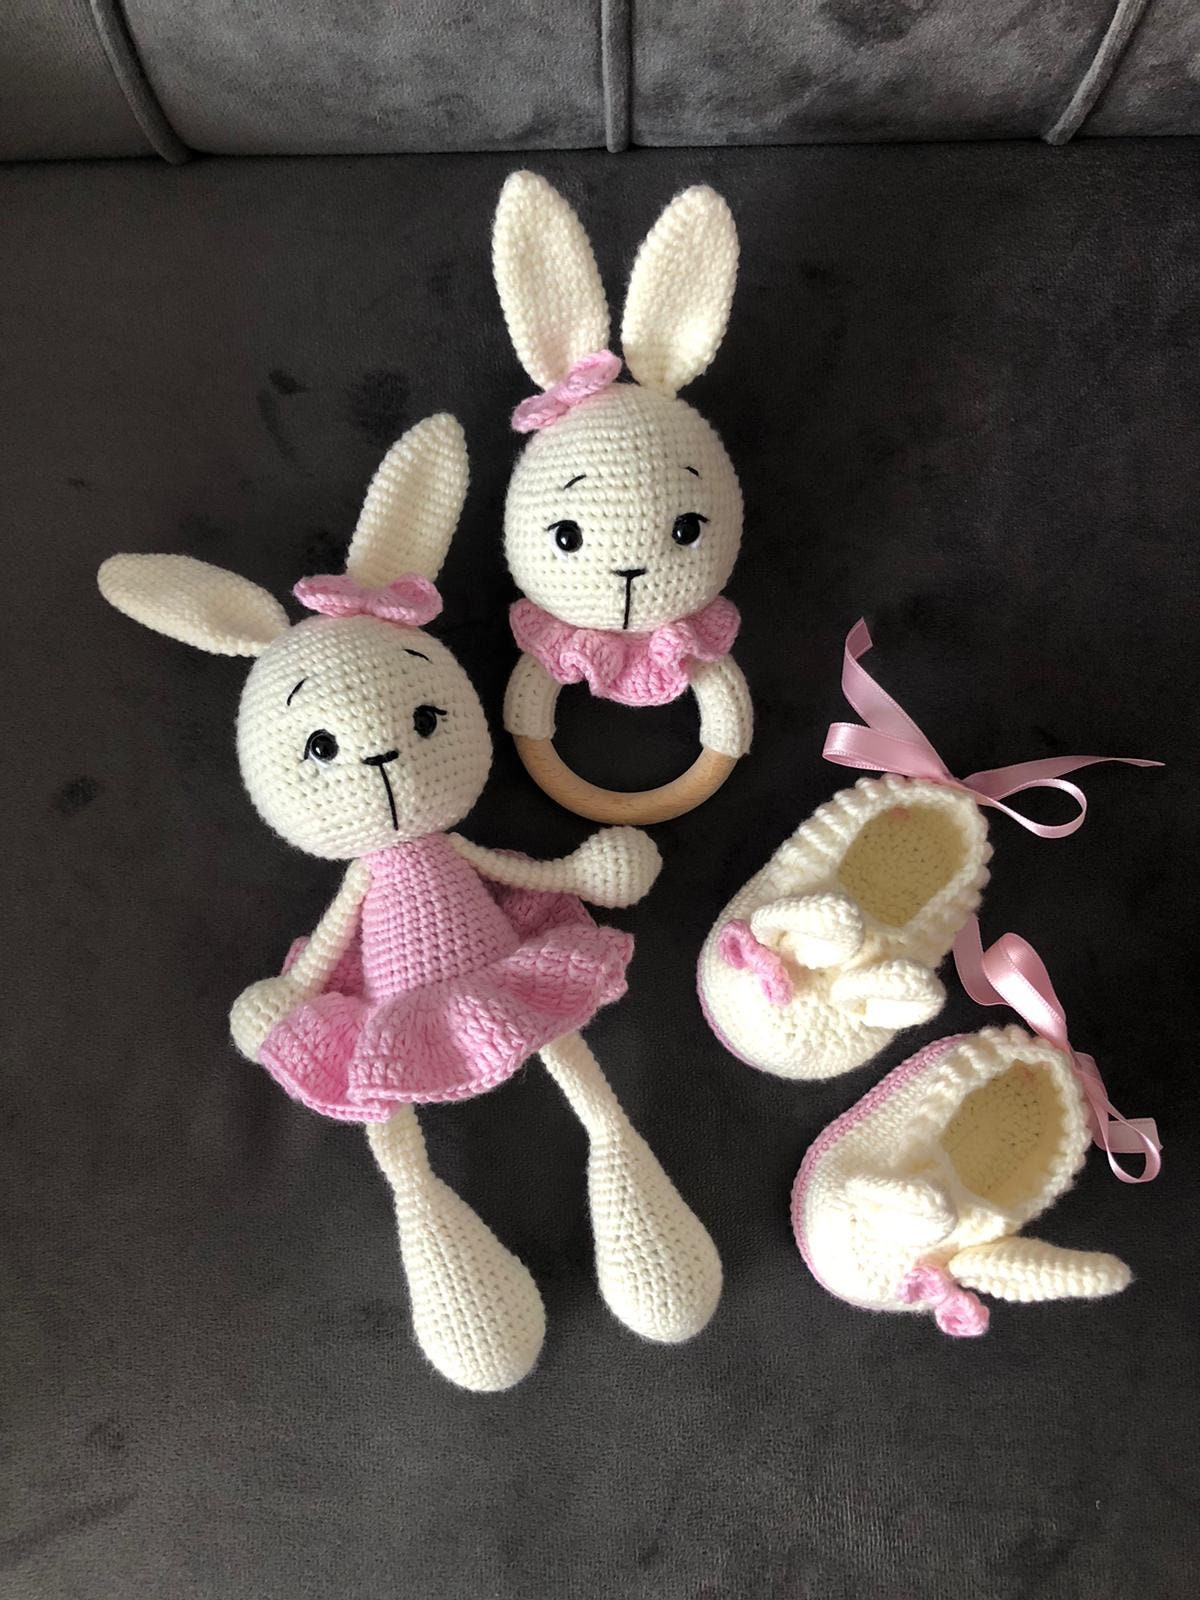 KawaiOnO Crochet Stuffed Animal - Adorable Handmade Bunny Daughter Plushie  Doll with Pink Dress, Ideal for Infants - Knitted Stuffed Animal Crocheted